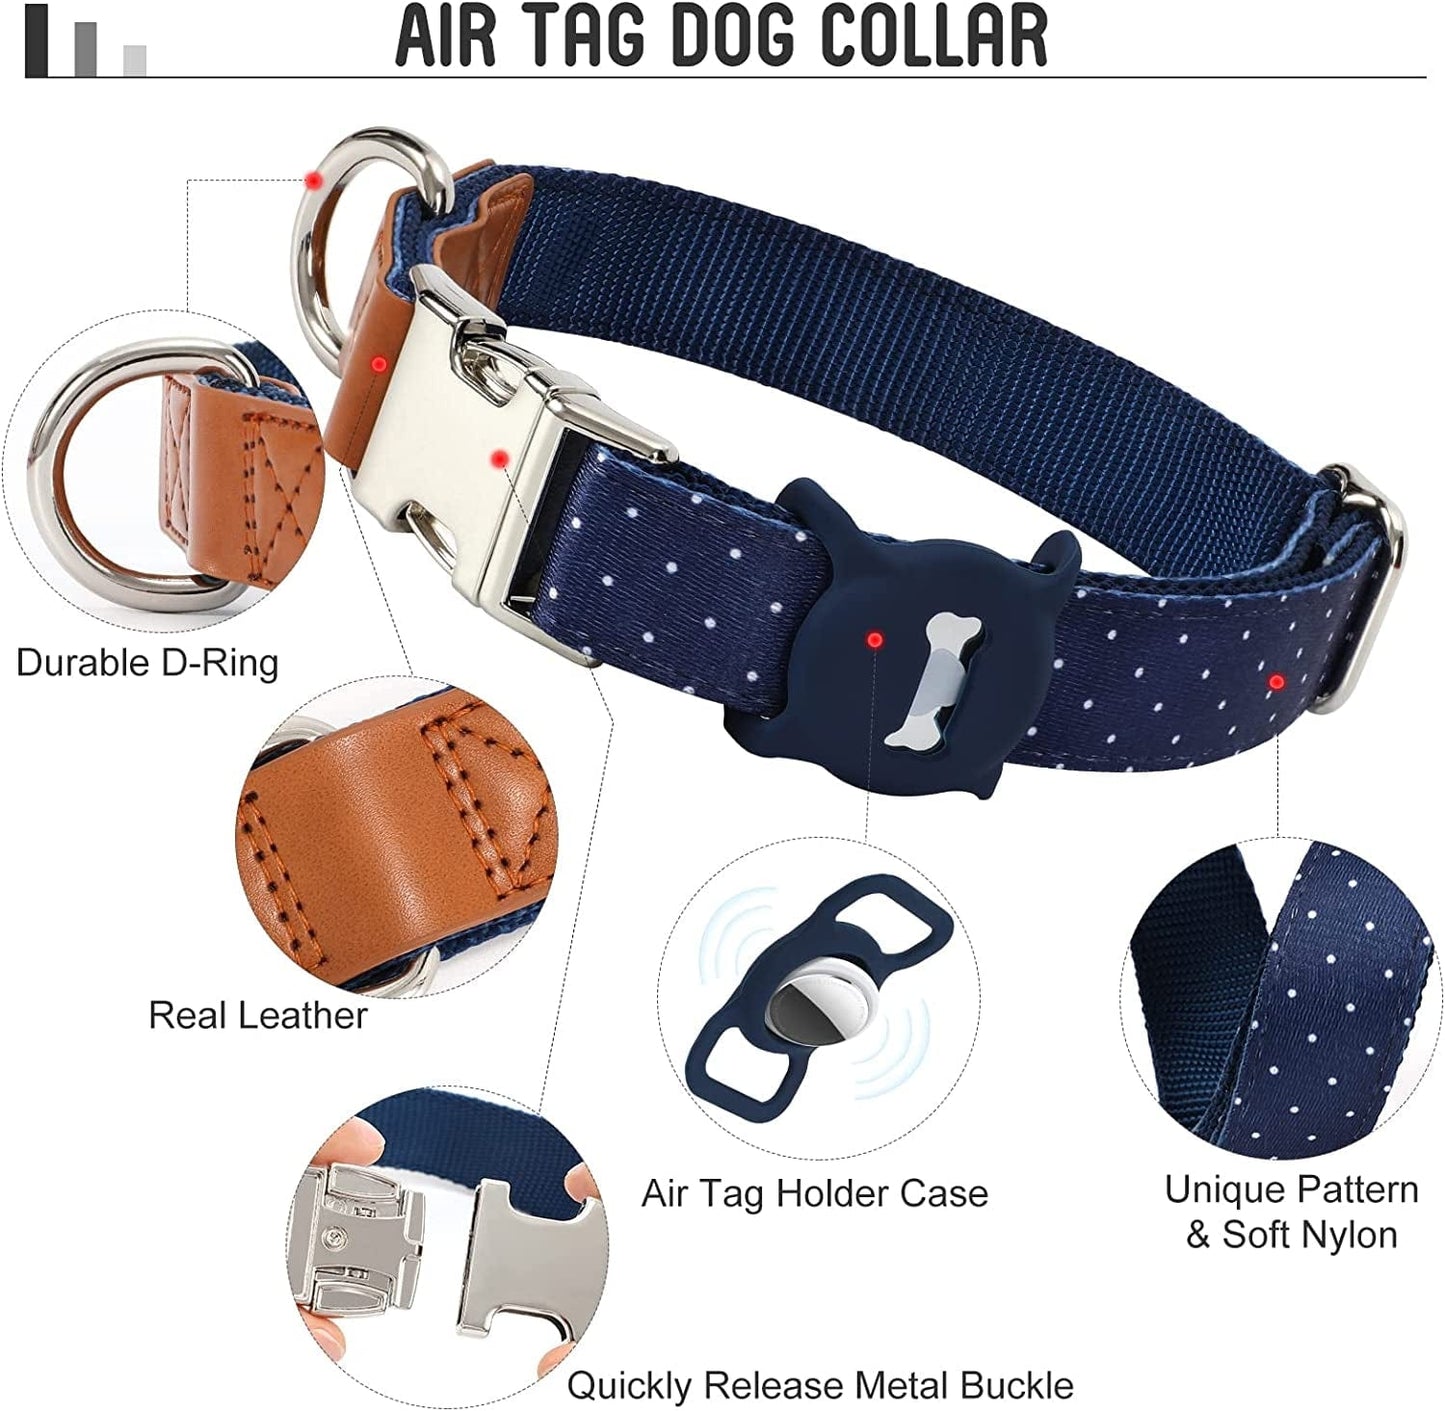 WLIXPBB Airtag Dog Collar for Small Medium Large Dog Heavy Duty Metal Buckle Air Tag Puppy Collar with Airtag Holder Case GPS Tracker Air Tag Collar for Apple Airtag Pet Backpack,Blue